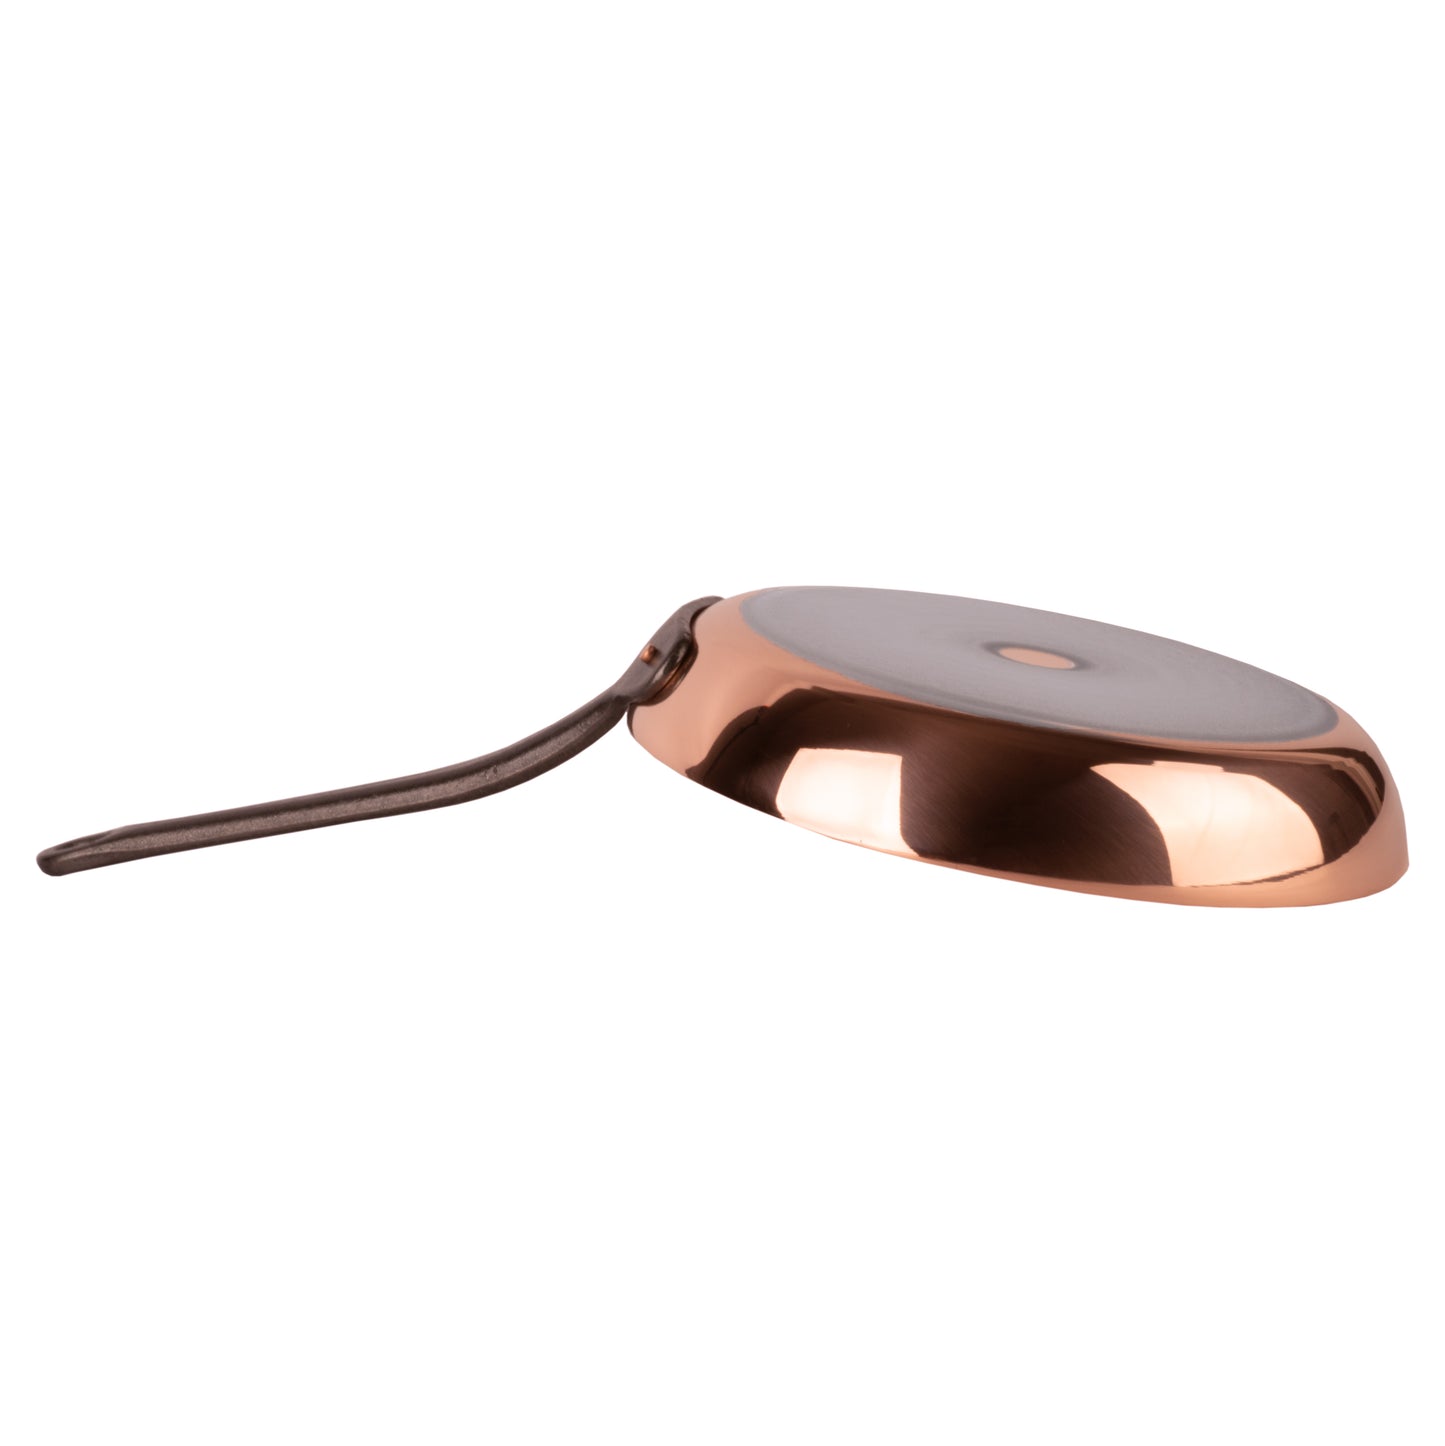 Pure copper frying pan for induction stoves without coating, Ø 9.5 in